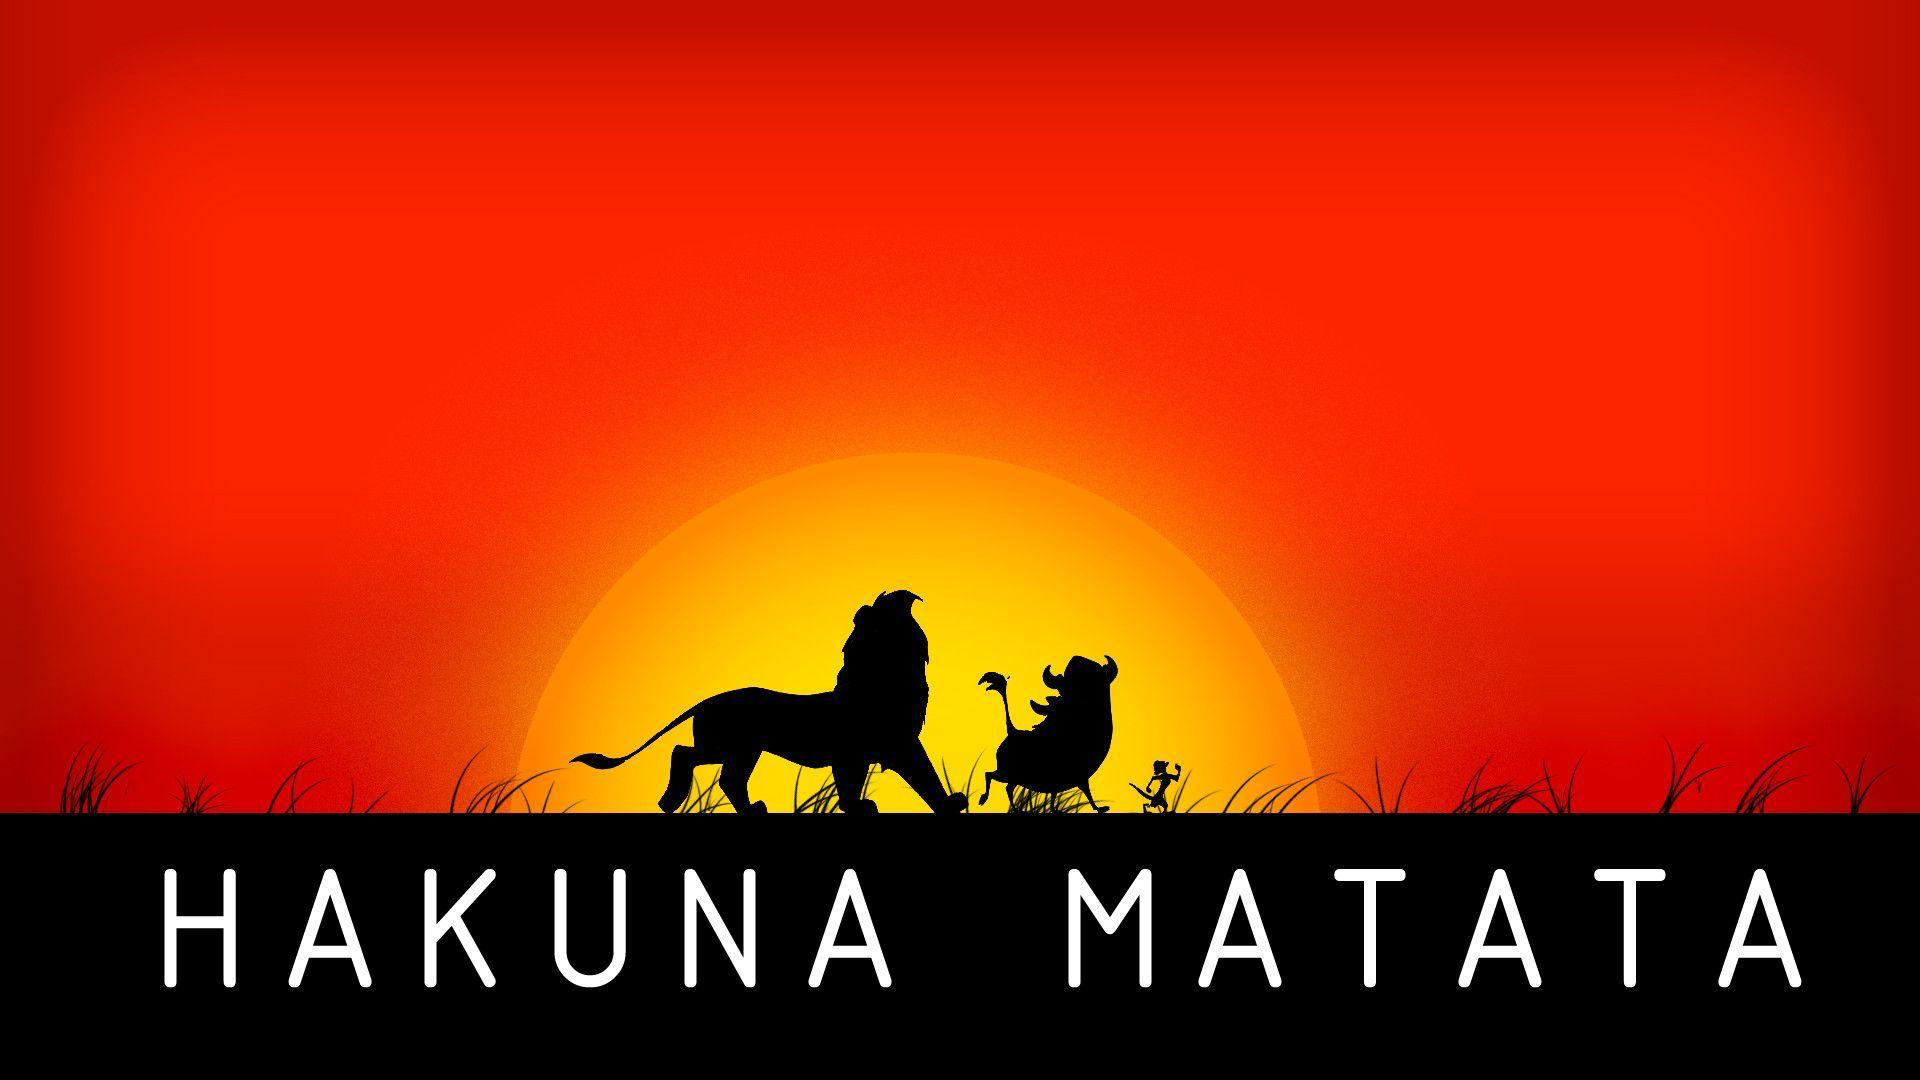 Disney trademarked ‘Hakuna Matata.’ but a new petition demands the